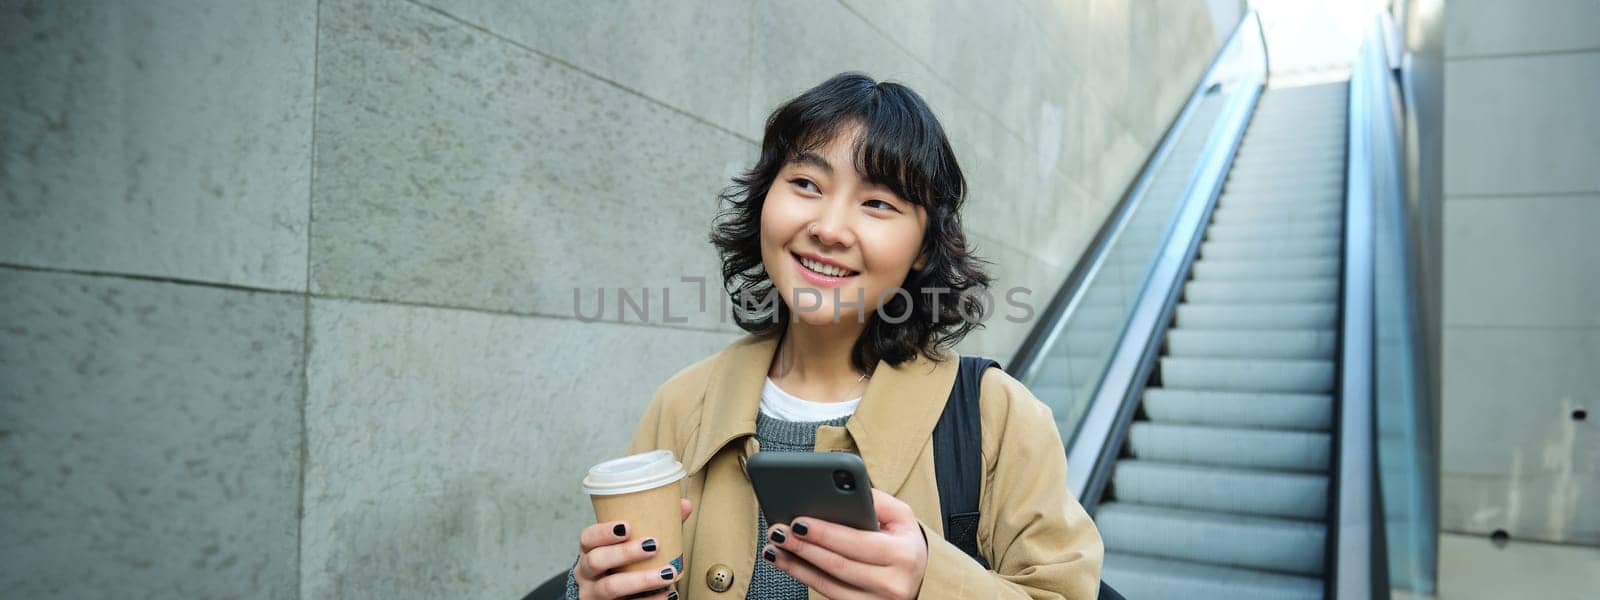 Beautiful brunette girl drinks coffee to go, goes down escalator and smiles, holds smartphone, uses mobile app. Copy space